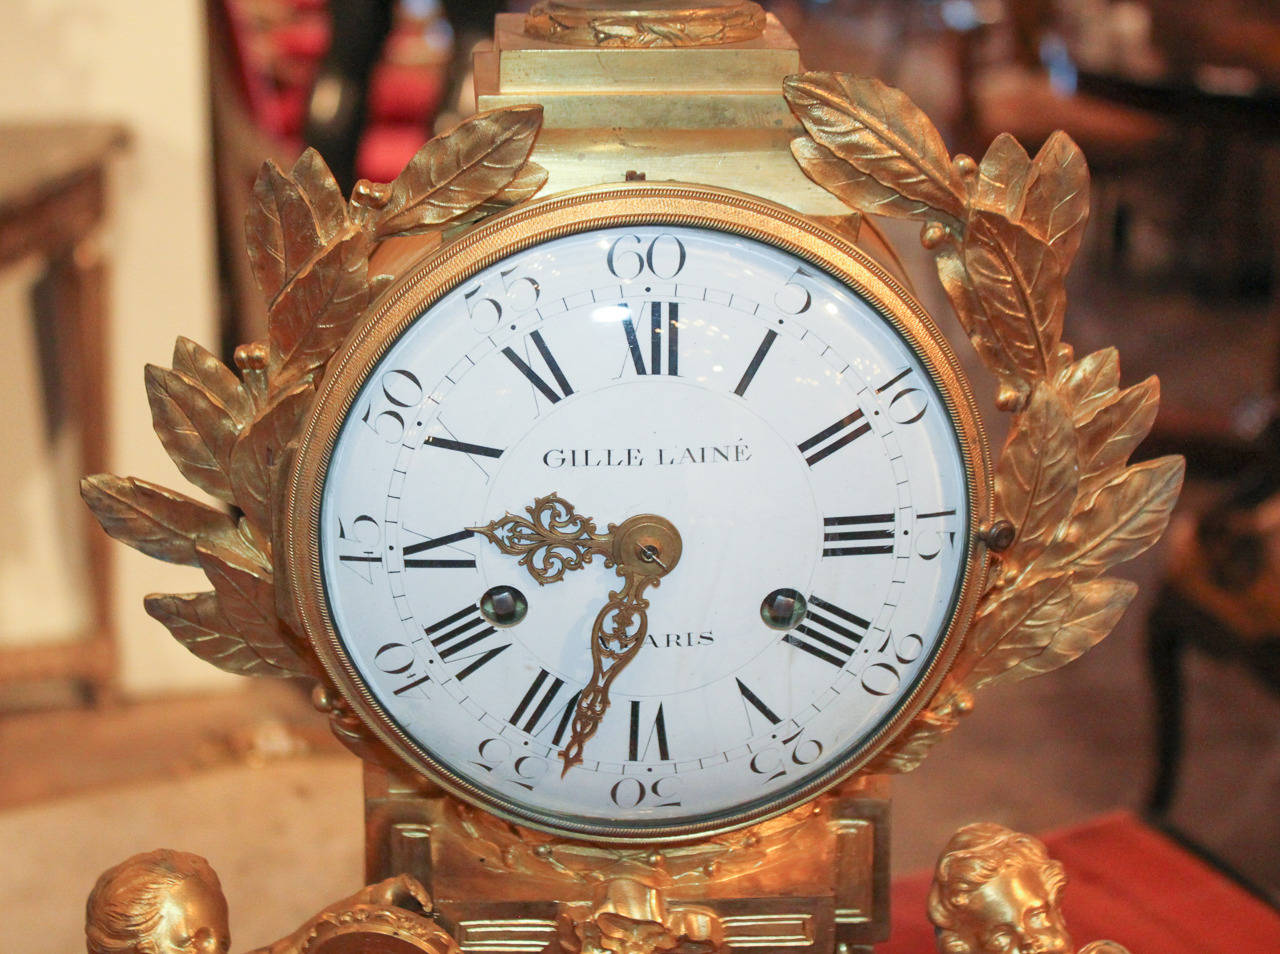 Gorgeous 19th century French gilt bronze clock with clock face reading 